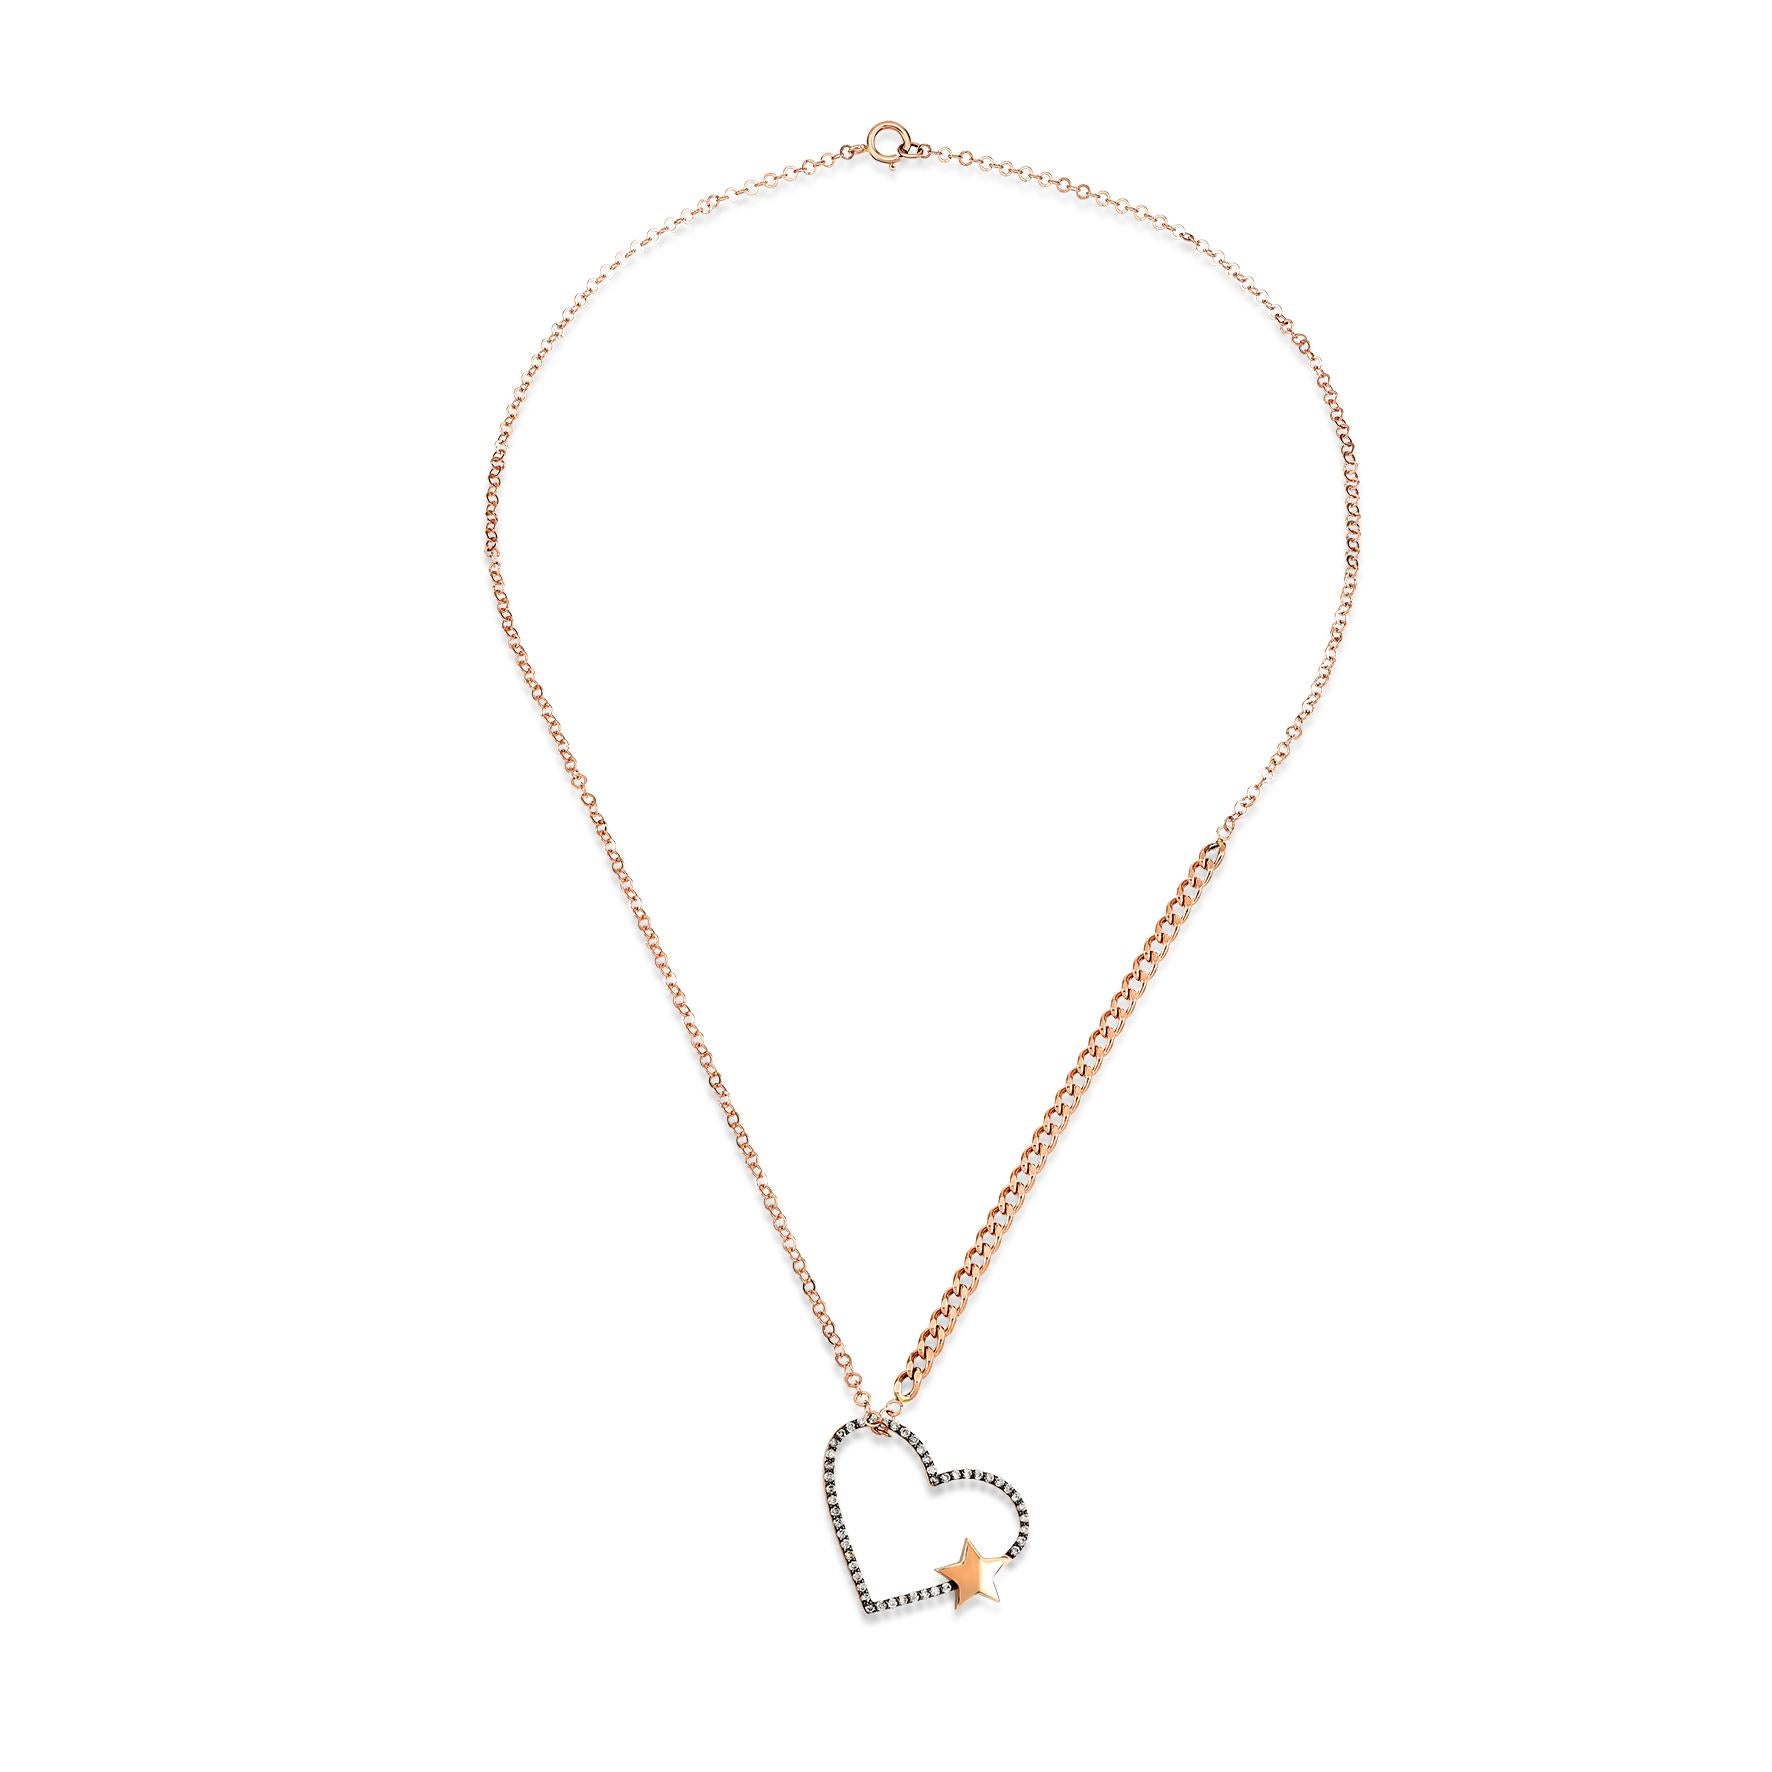 Retro short chain heart necklace with white diamond by Selda Jewellery

Additional Information:-
Collection: You Are My Star collection
14K Rose gold
0.17ct White diamond
Chain length 40cm